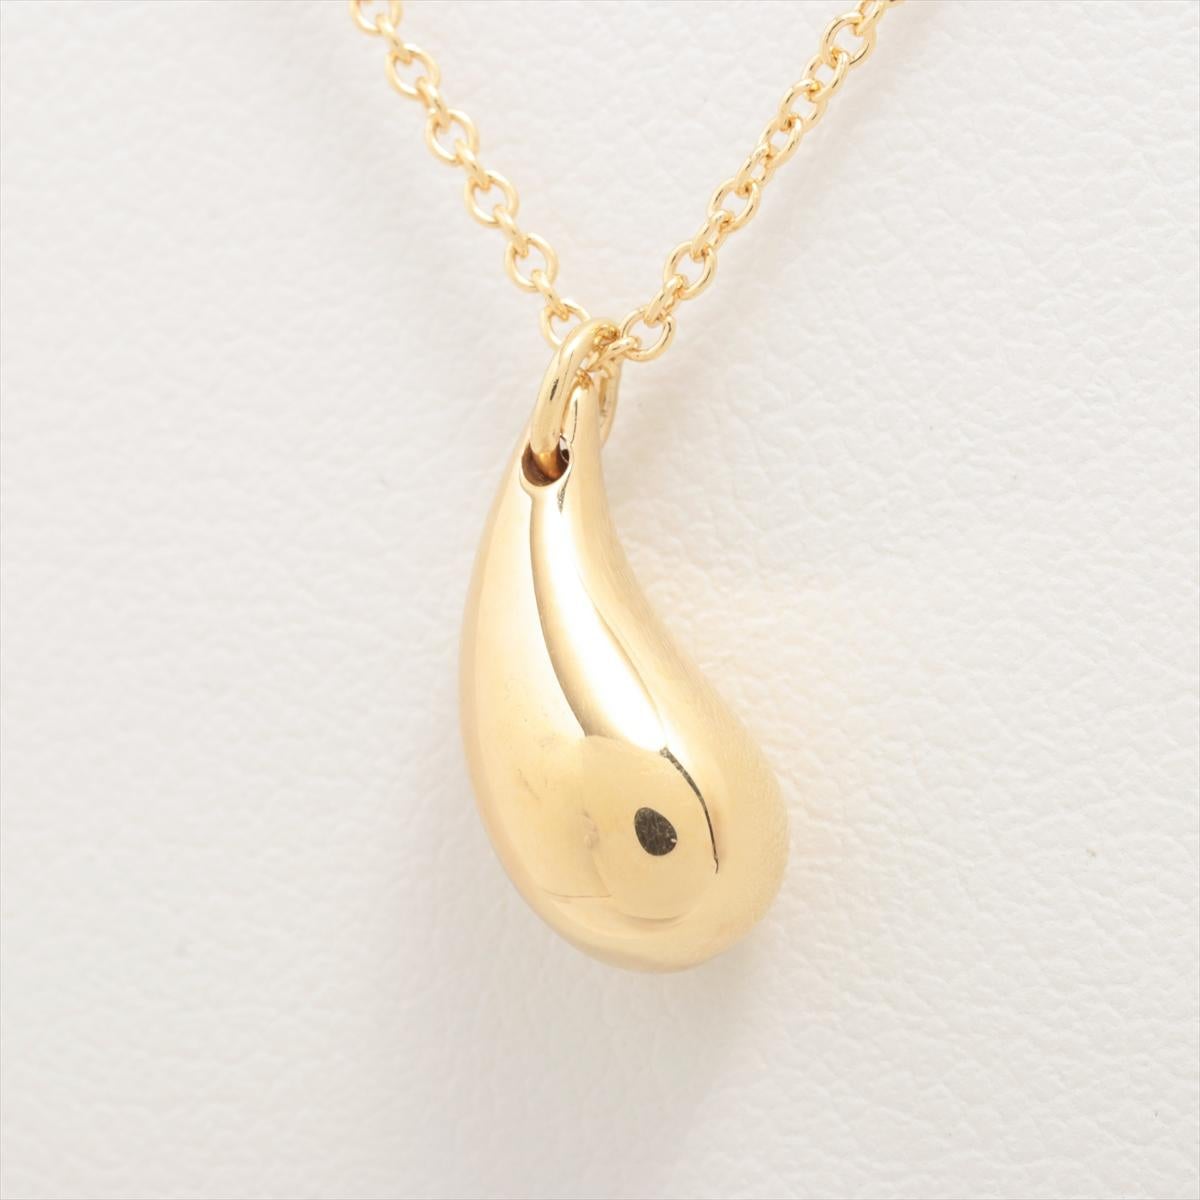  Tiffany Teardrop Necklace  In Good Condition For Sale In Oyster Bay, NY